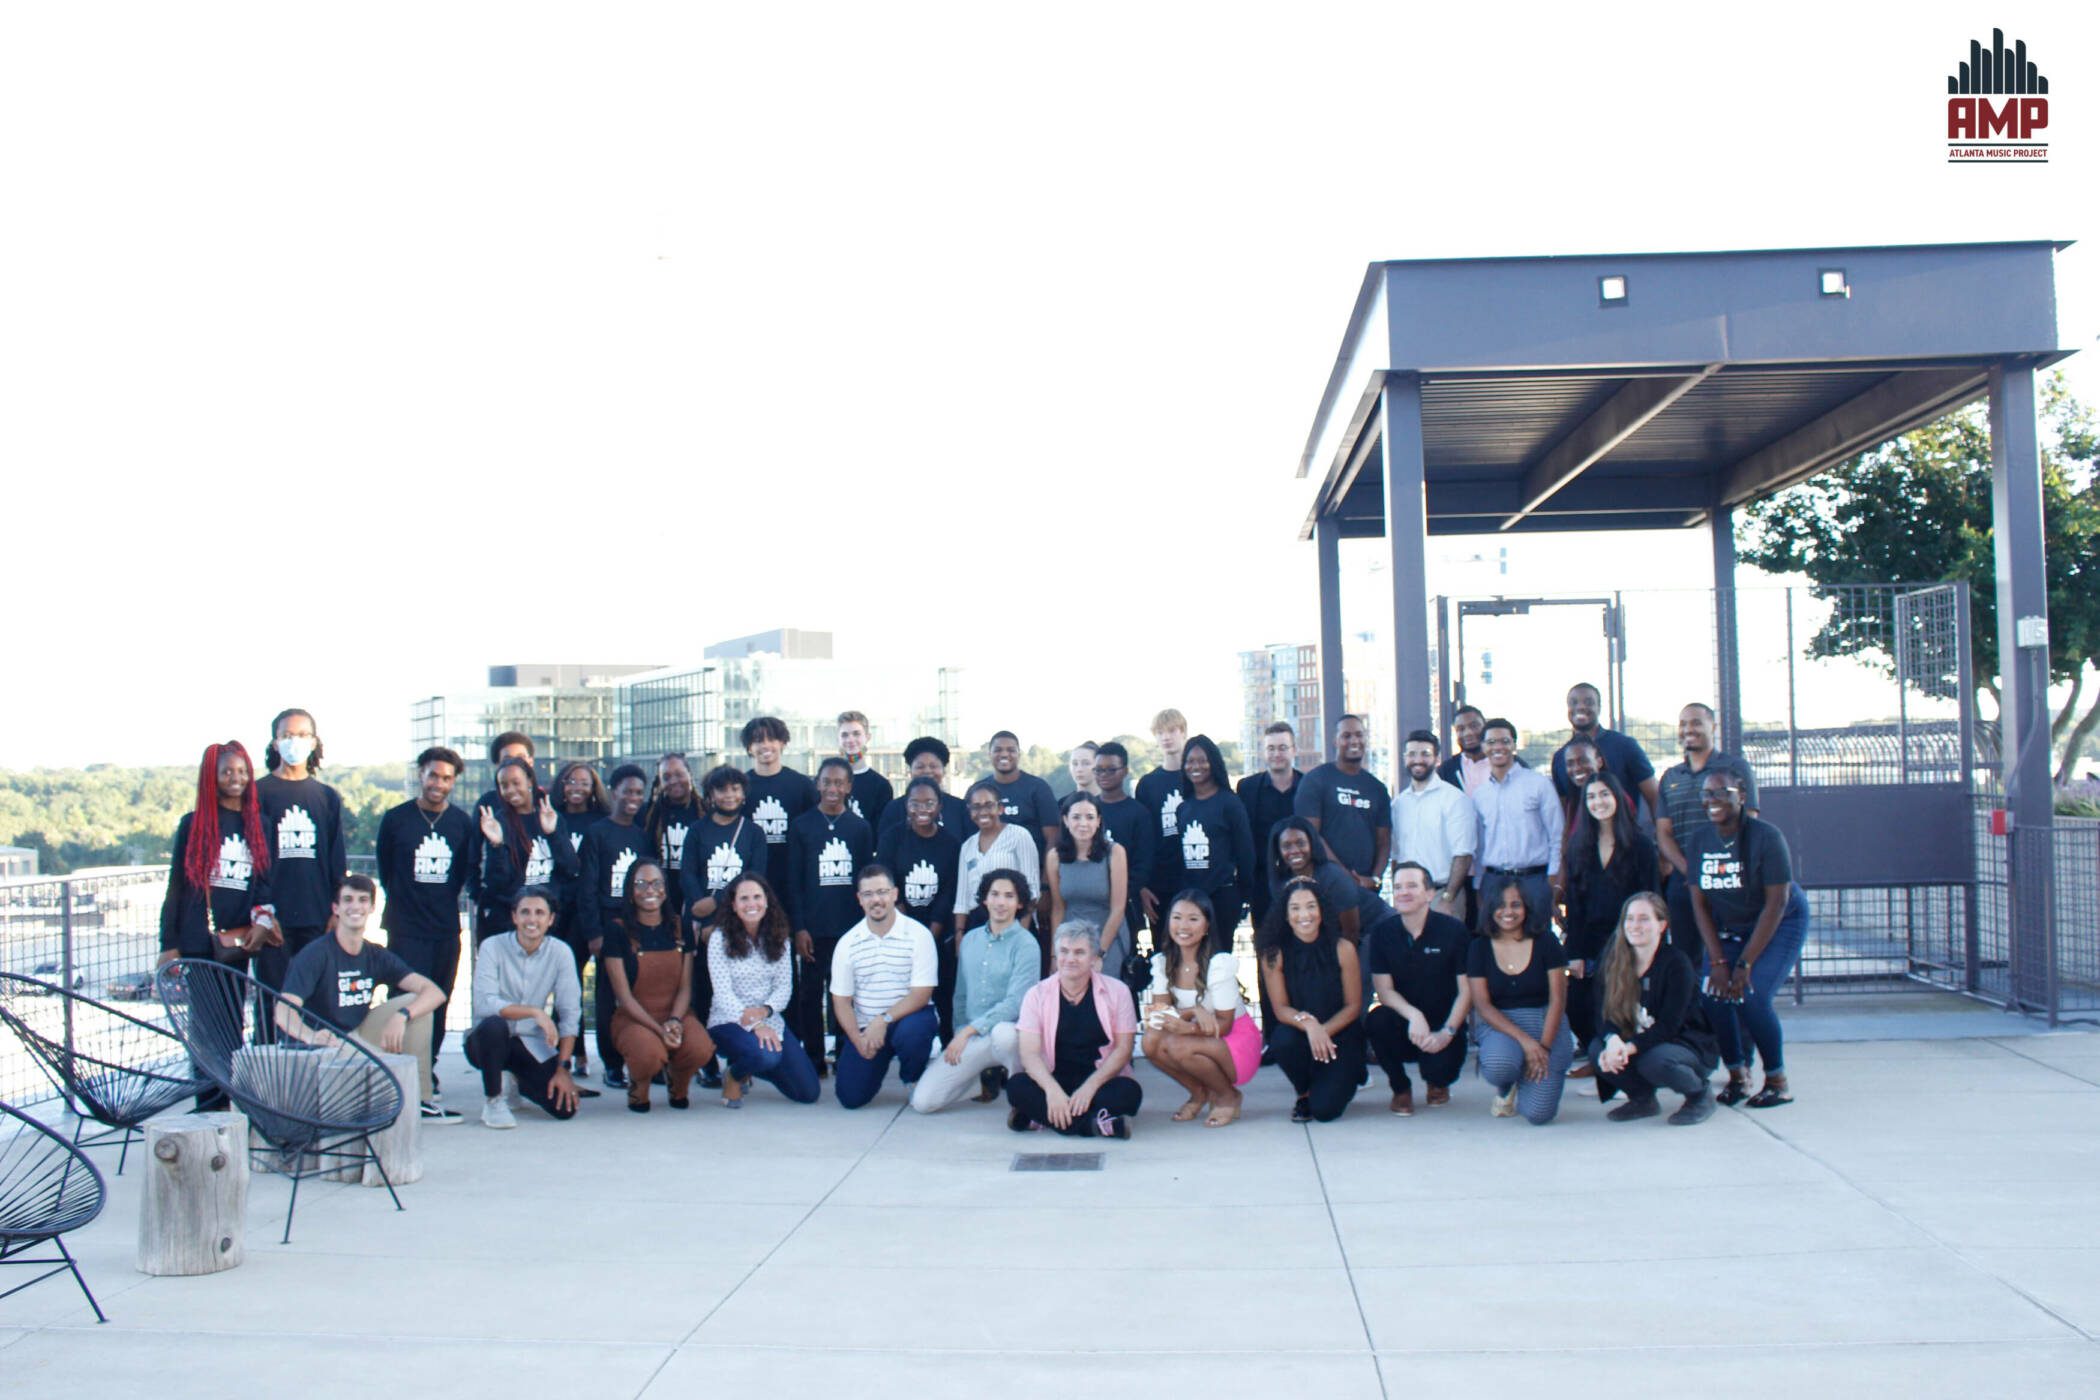 AMP students dressed in their black t-shirts with the AMP logo on front, pose with BlackRock employees on their rooftop overlooking Ponce De Leon Avenue at their Atlanta office